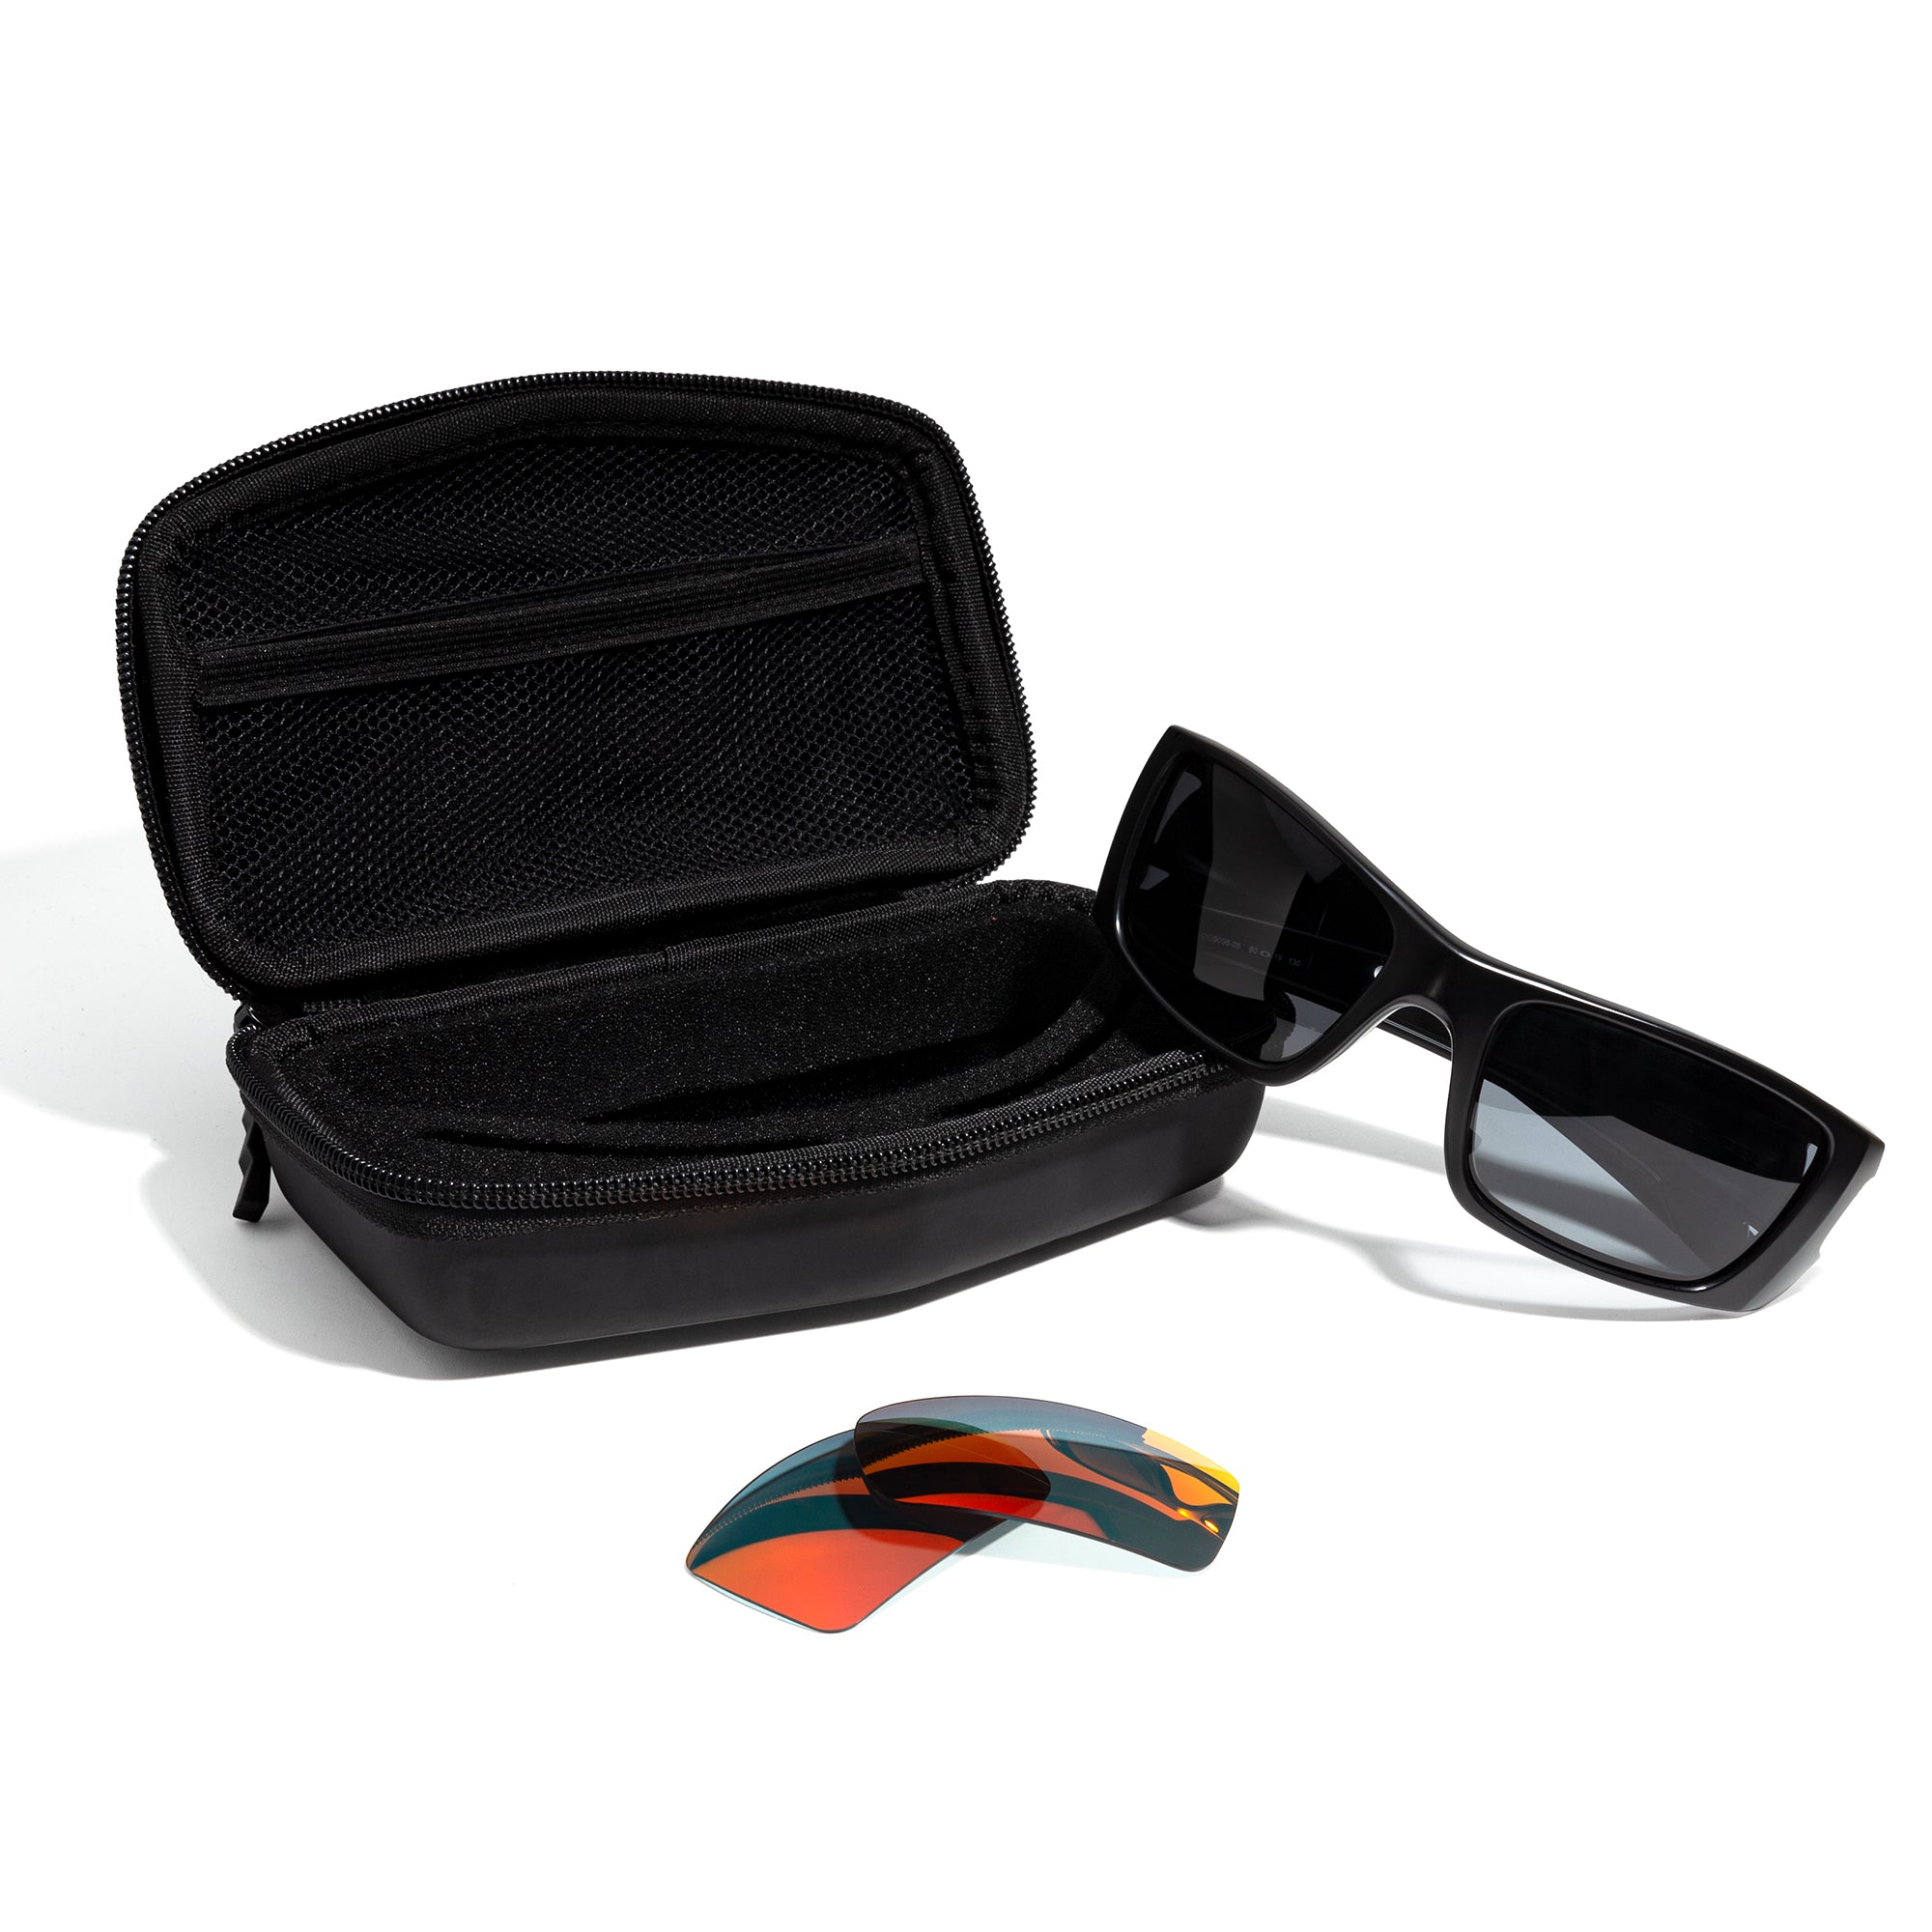 revant large sport sunglass case open with sunglasses and a pair of lenses around it